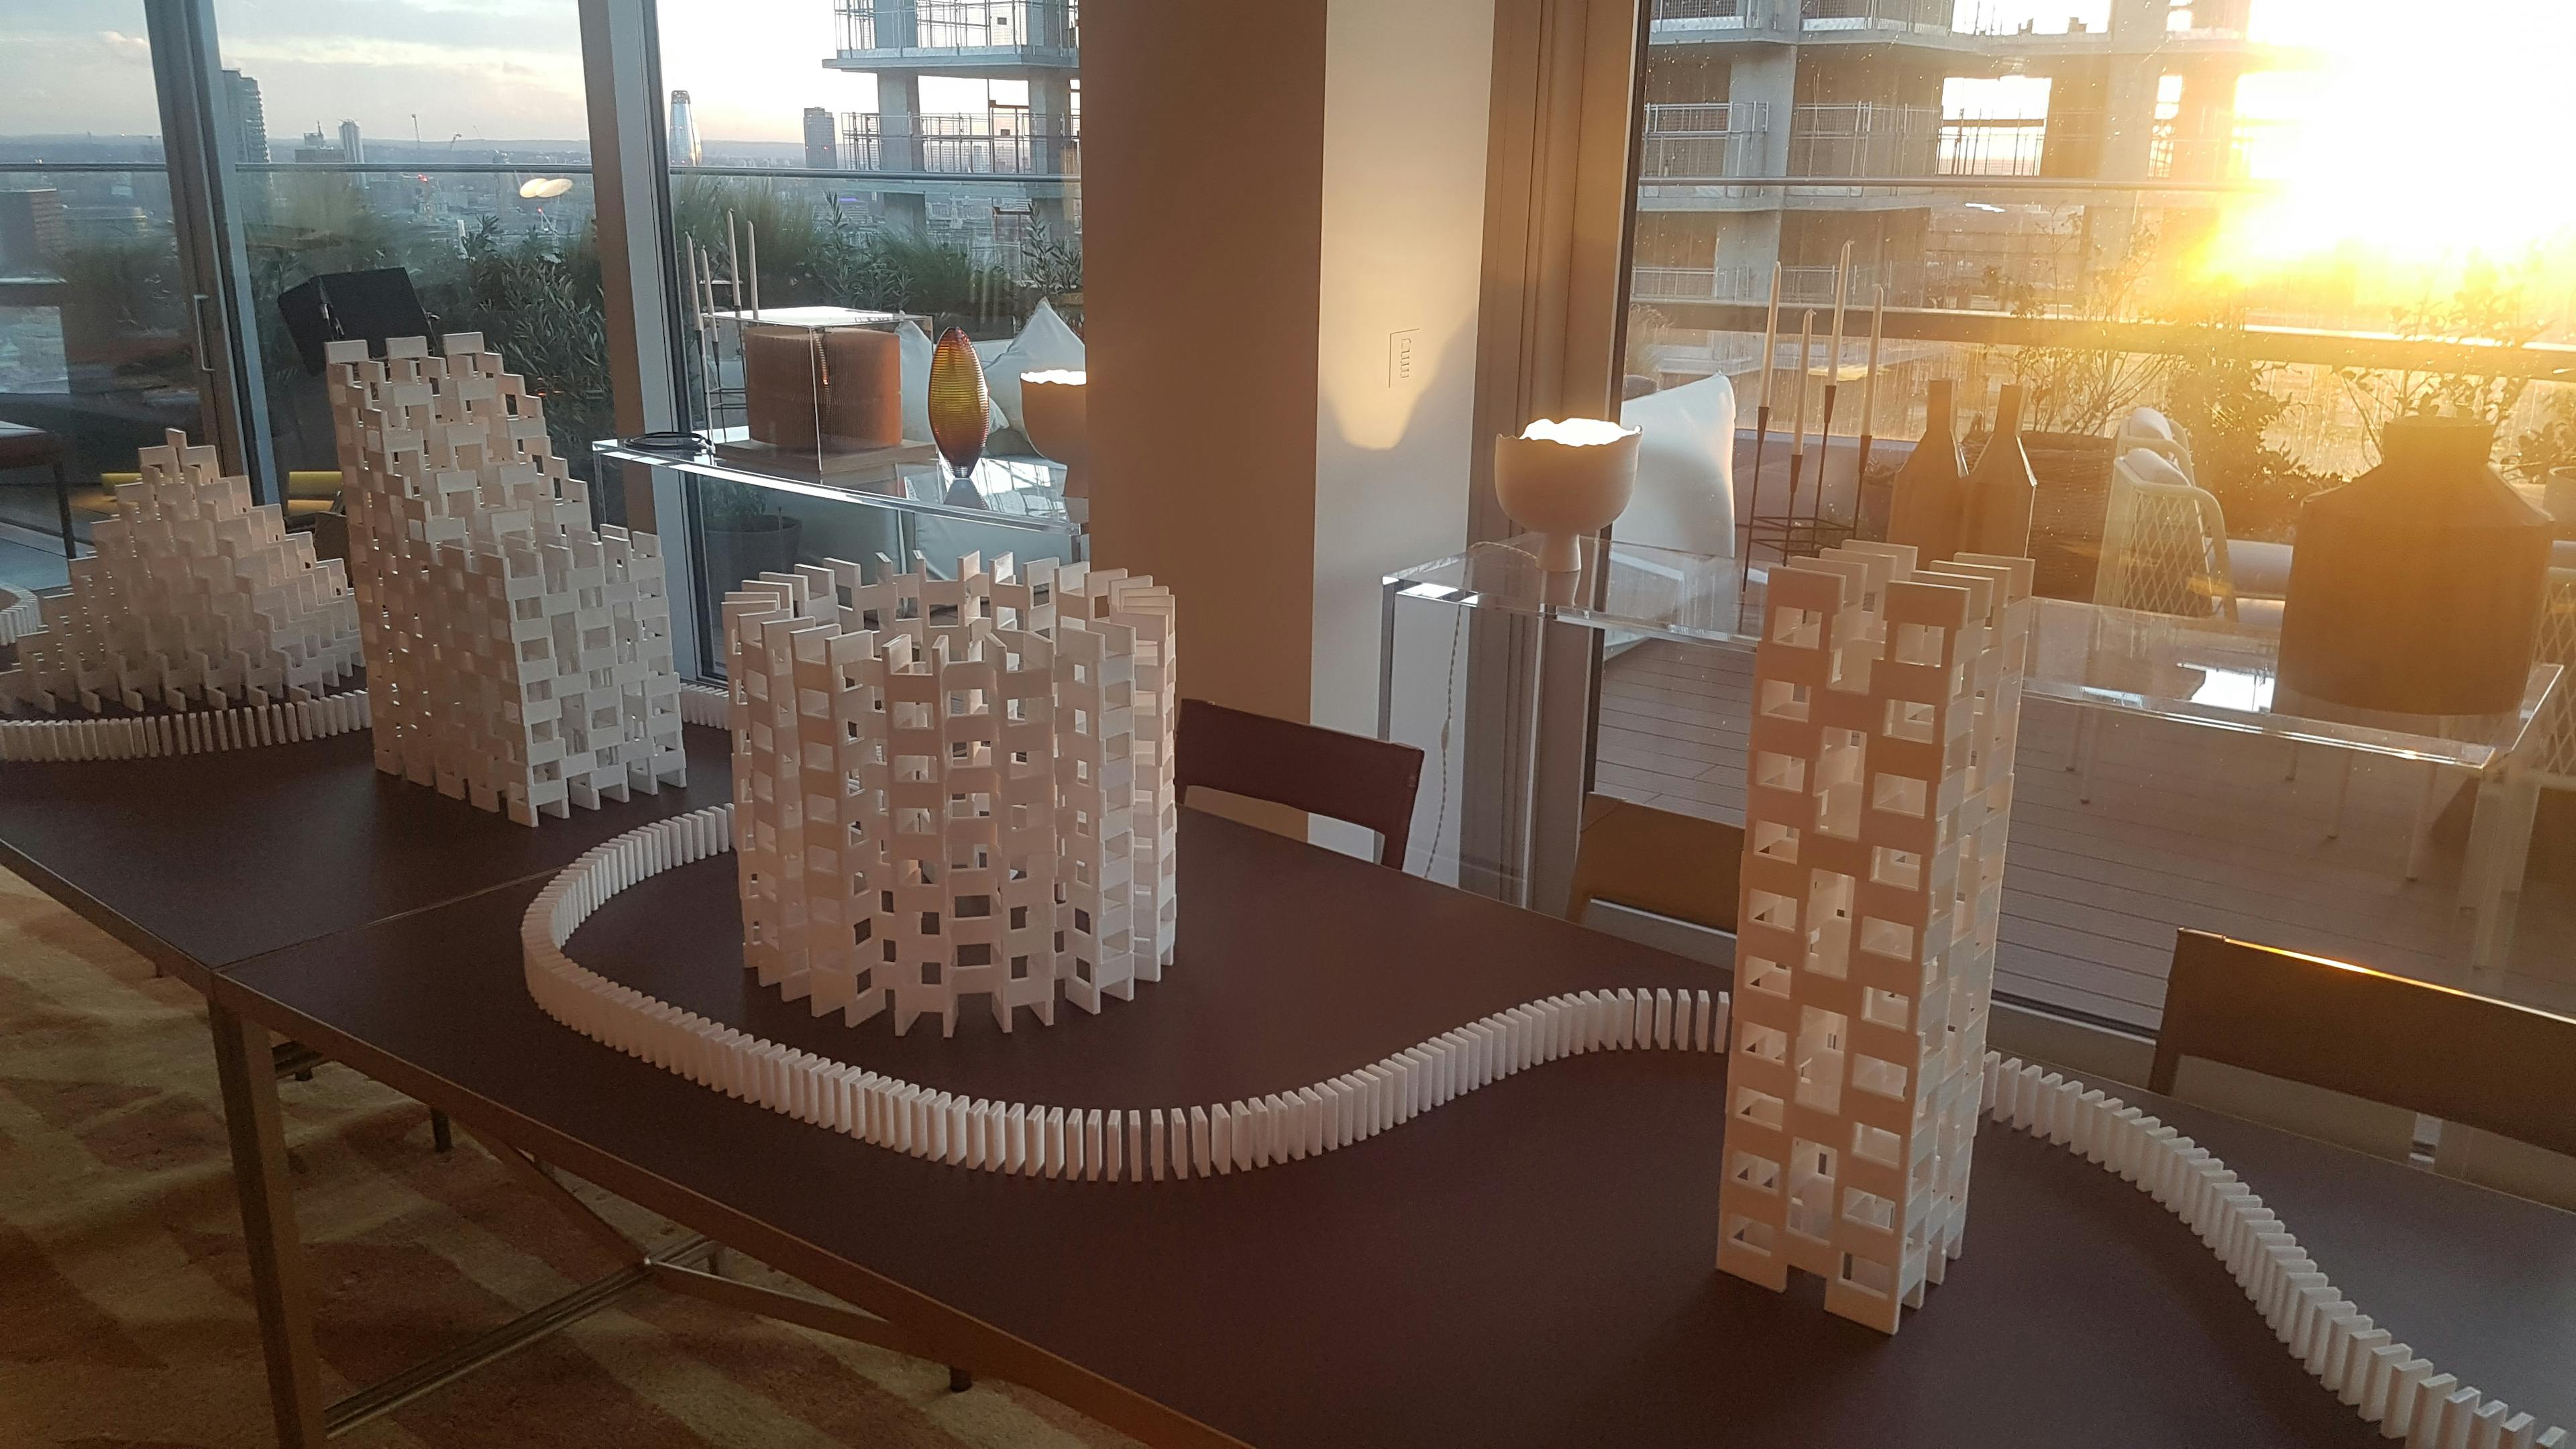 Various domino structures on a table